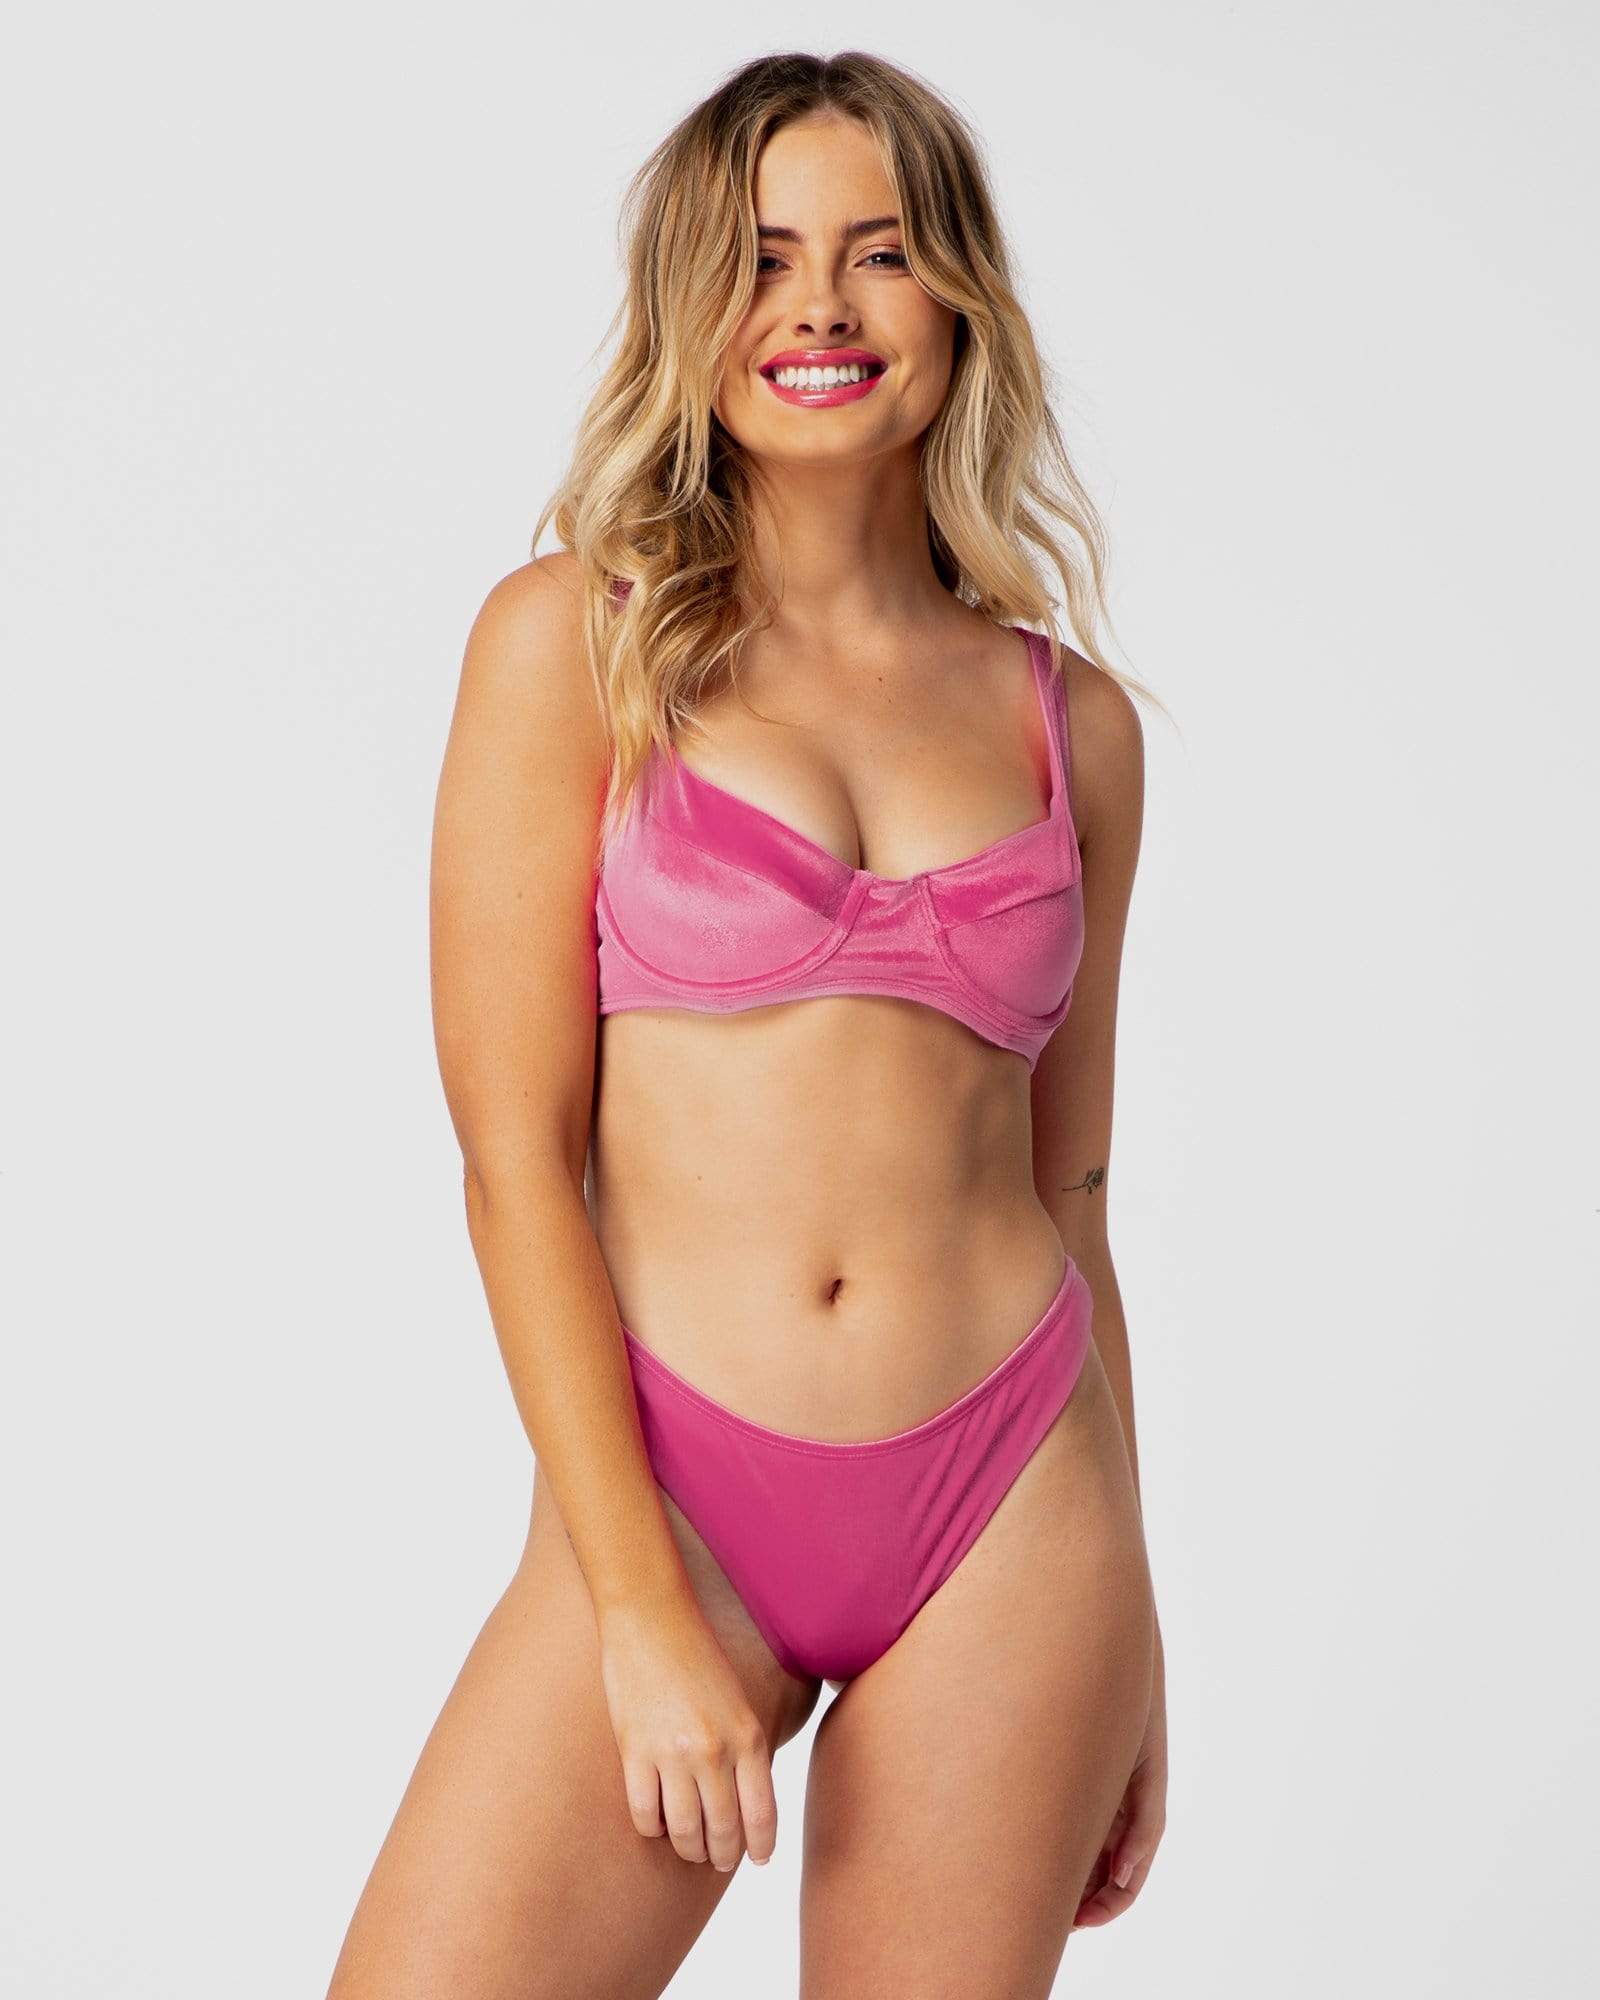 <b>Barbados</b><br>Pink Underwire Top<br>Fairy Floss Scented<br>Sustainable Australian Swimwear-Cali Rae-stride